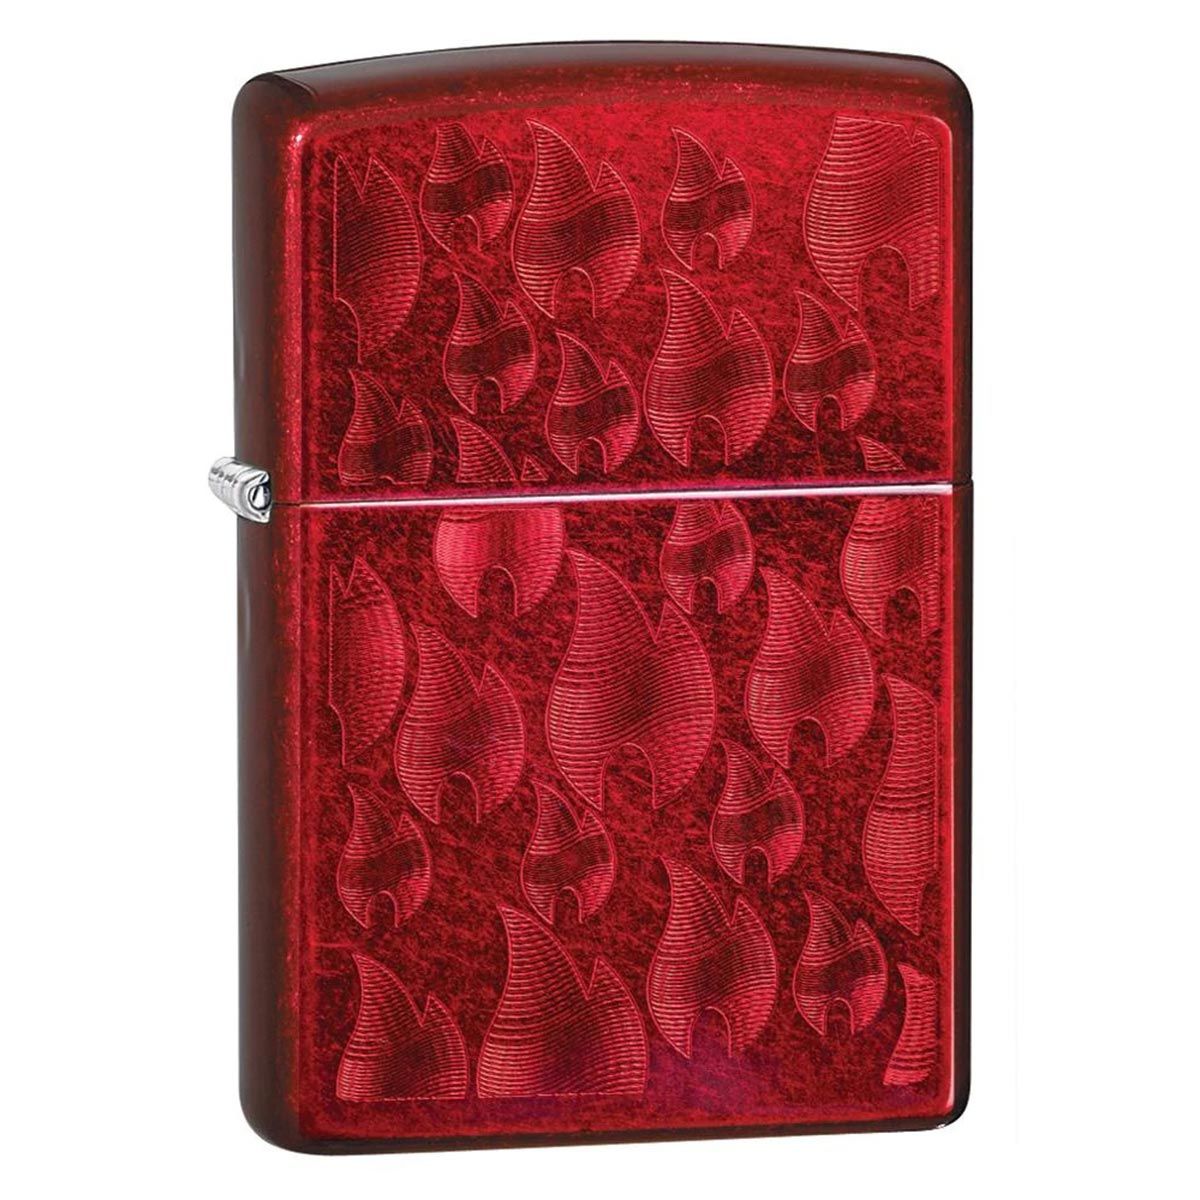 Zippo Iced Flame Design Windproof Pocket Lighter: Buy Zippo Iced Flame  Design Windproof Pocket Lighter Online at Best Price in India | Nykaa